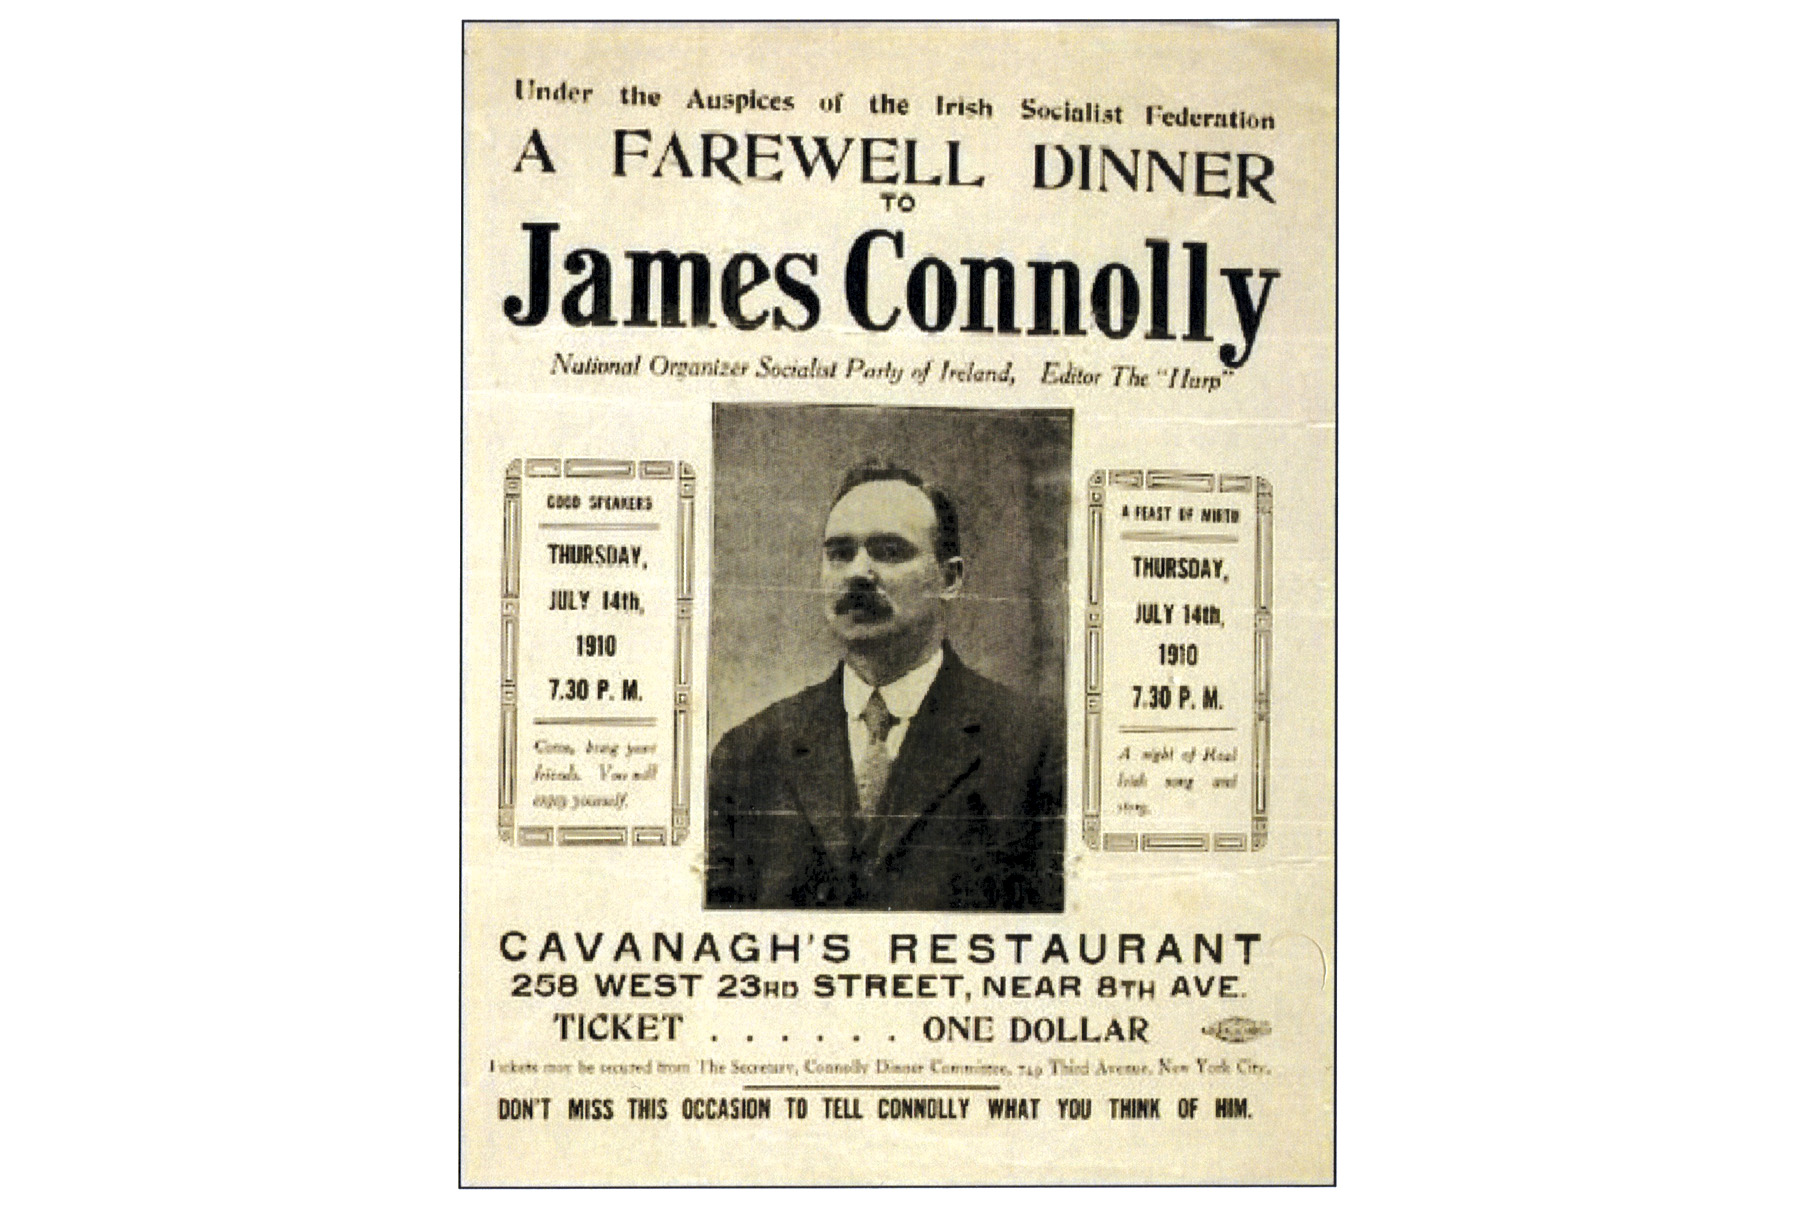 Poster  advertising a farewell dinner for James  Connolly at Cavanagh’s Restaurant in New  York in 1910. 